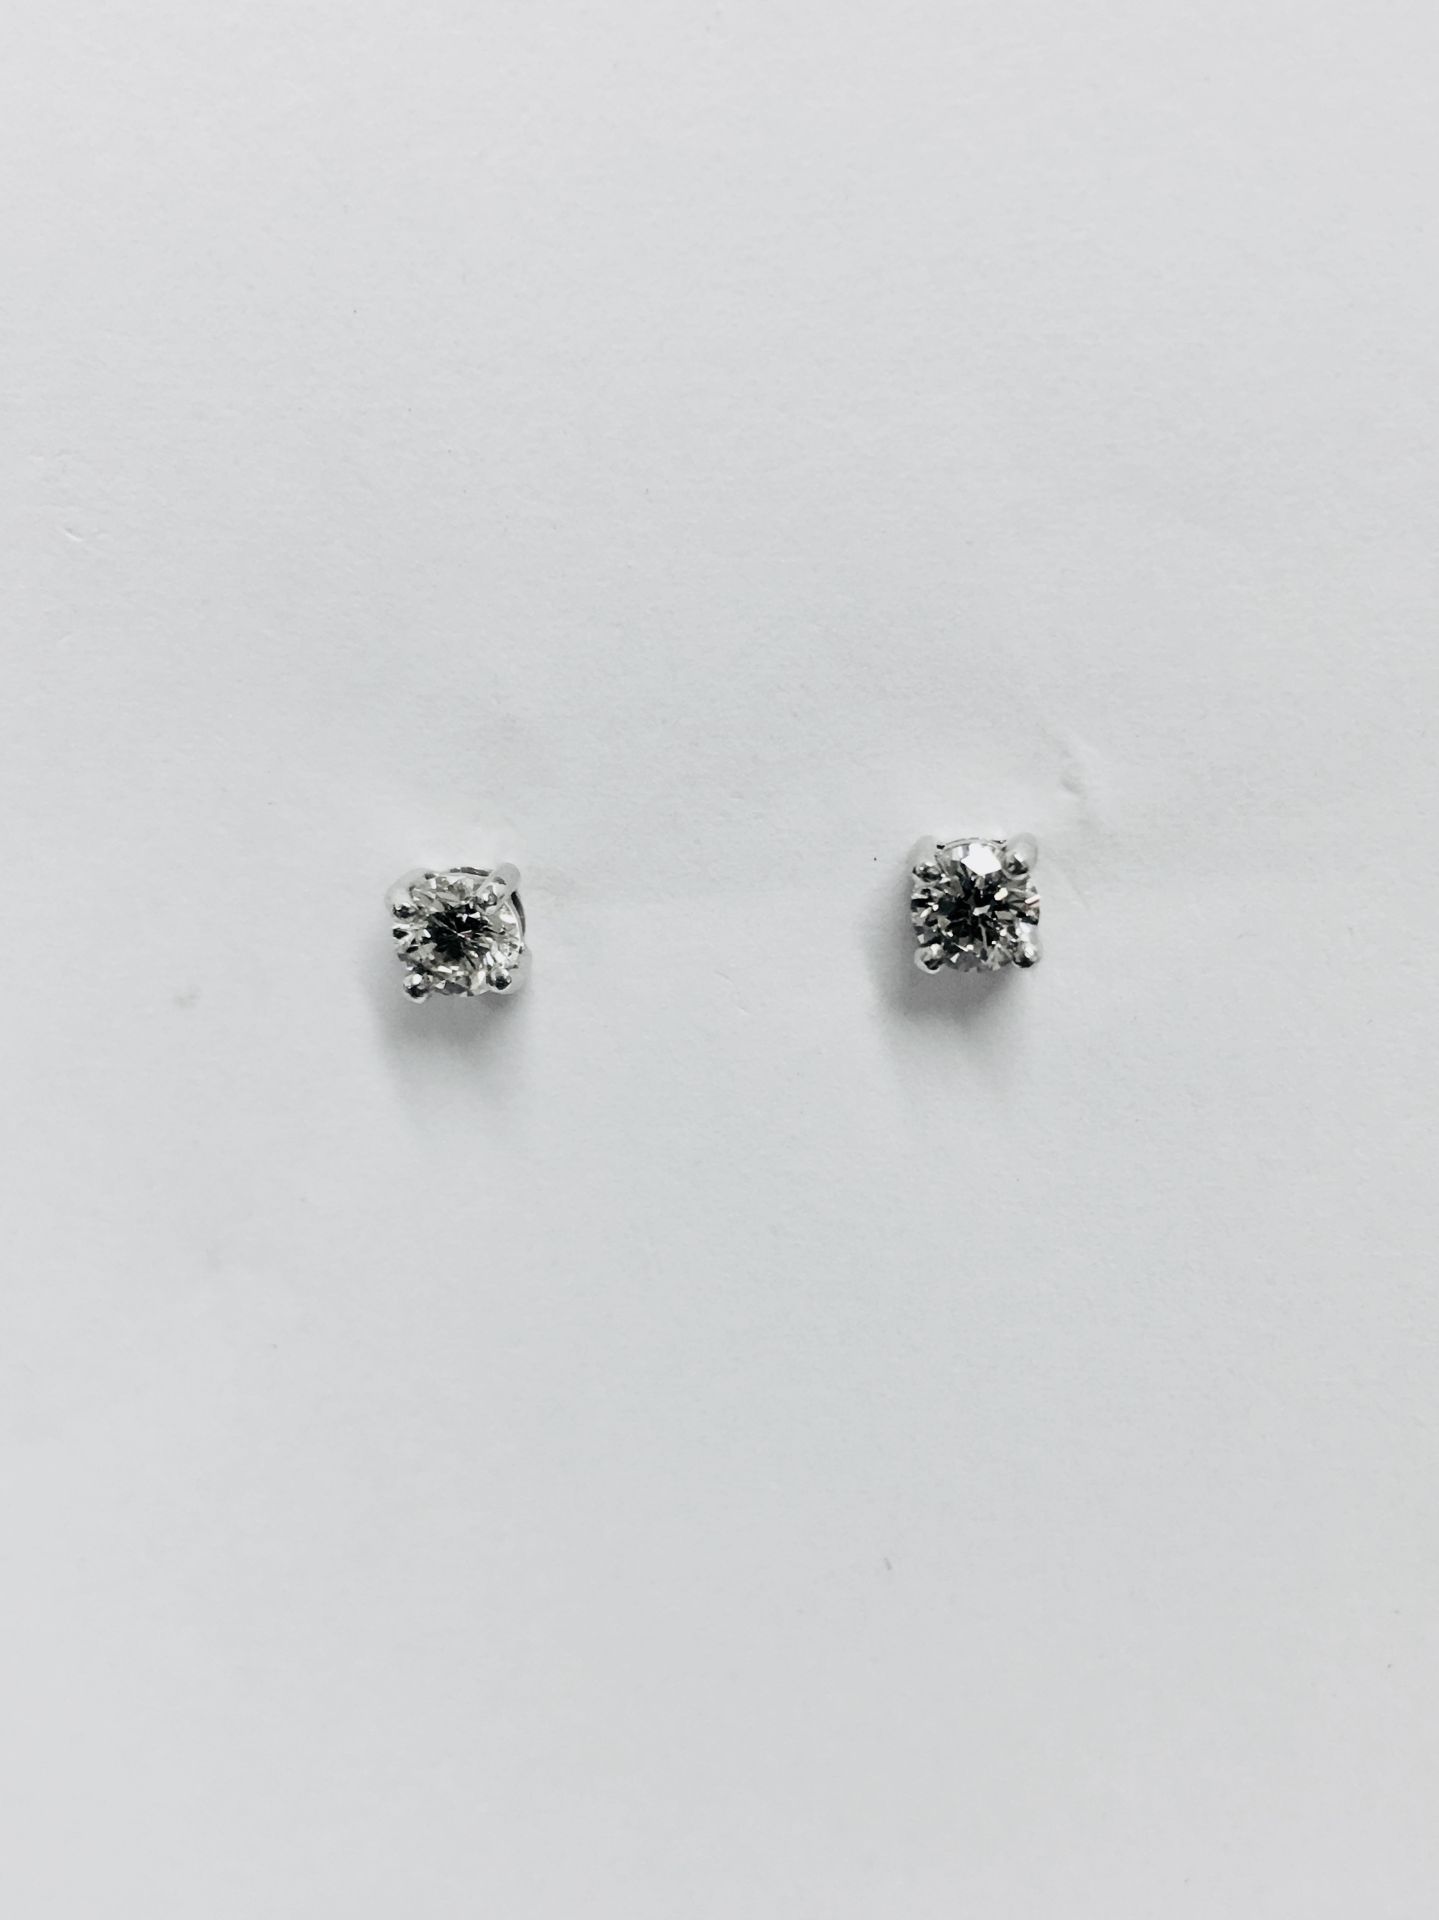 0.50ct diamond solitaire stud earrings set in platinum. I/J colour, si2 clarity.4 claw setting